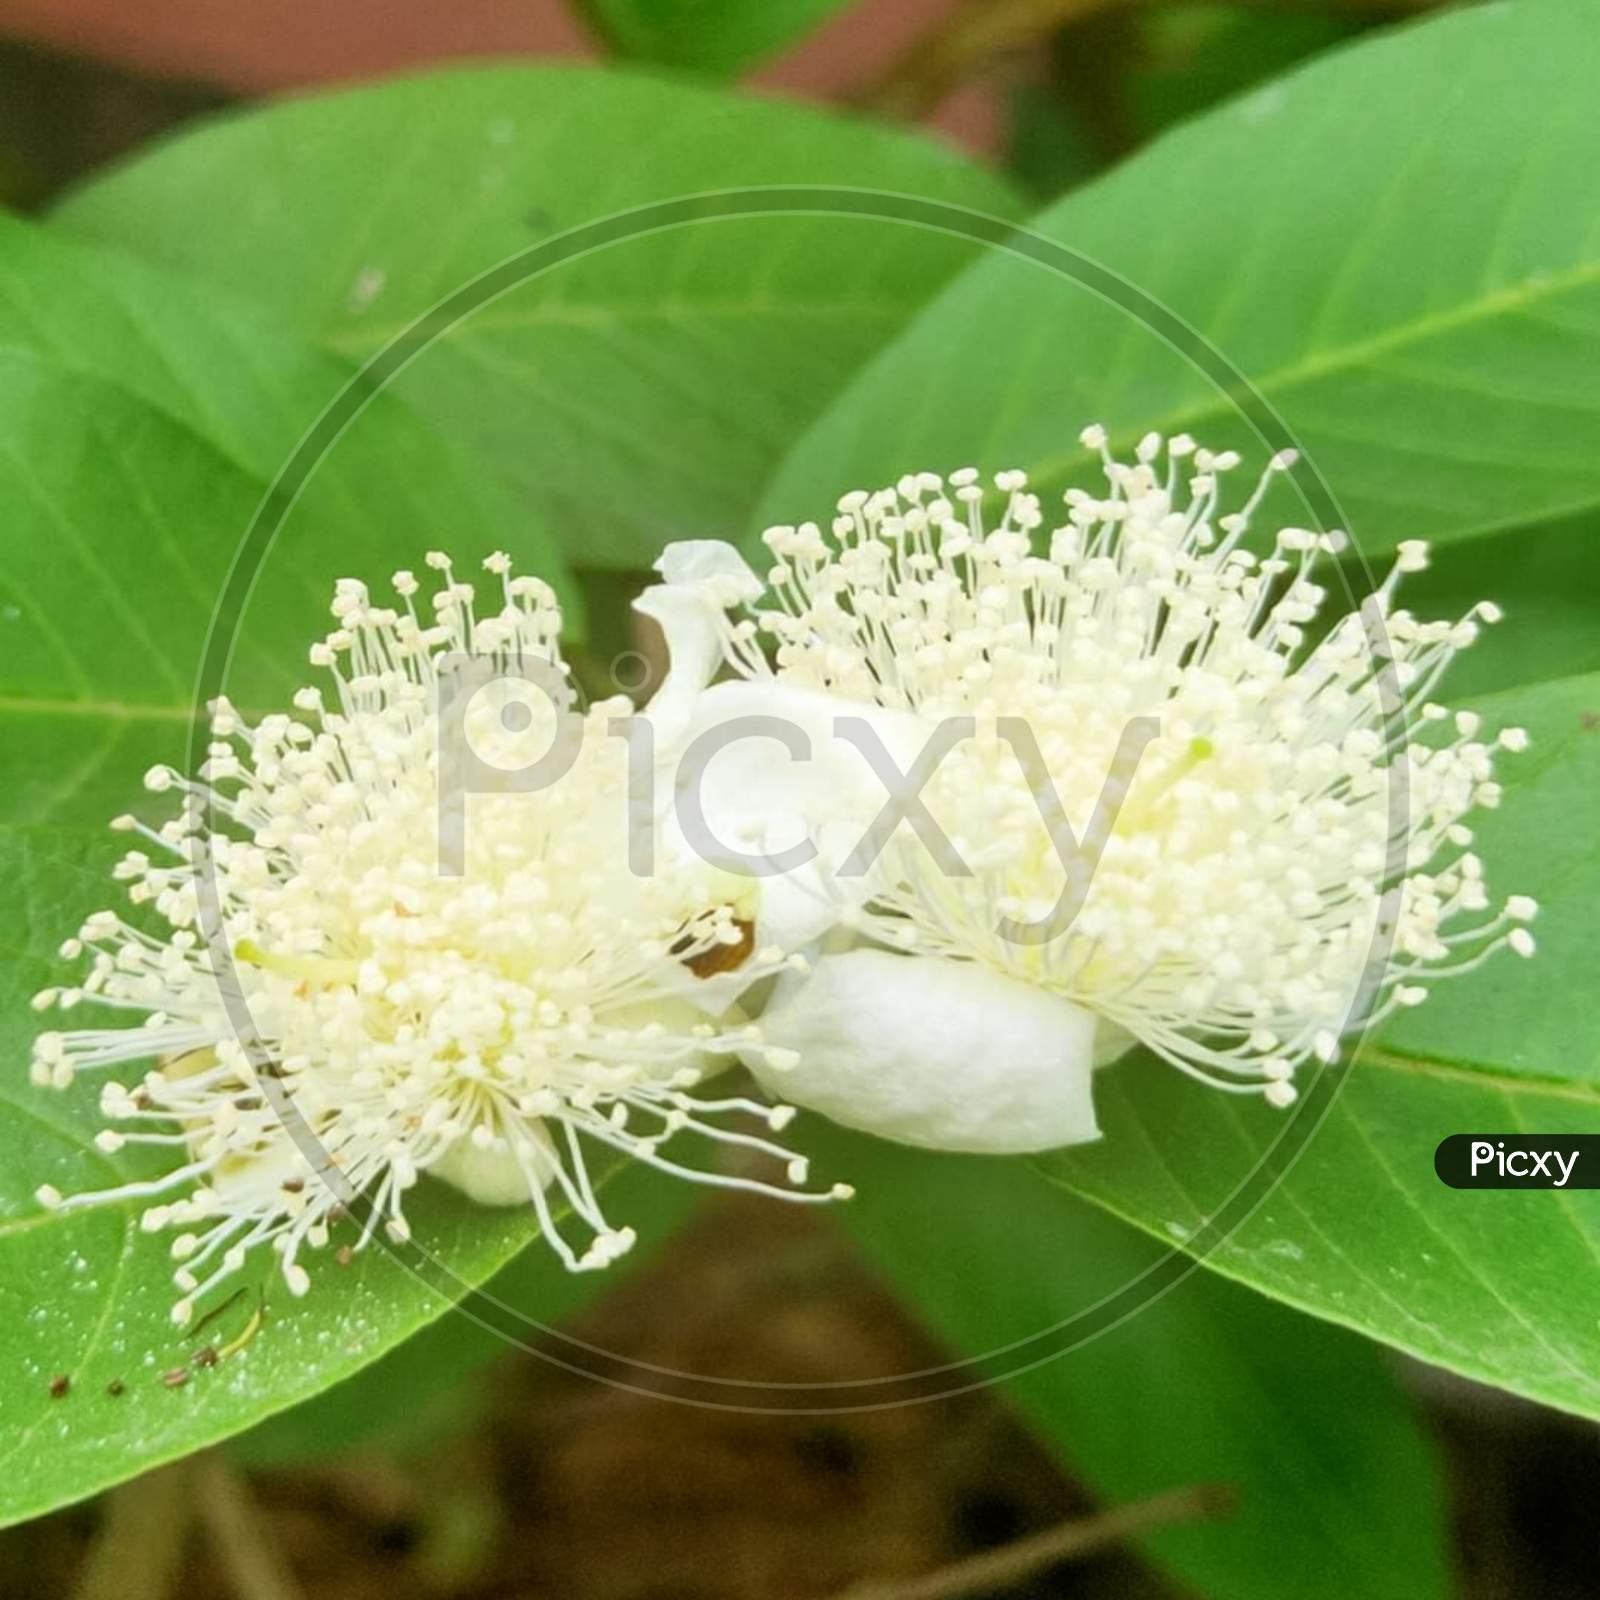 White Guava flower upon the green leaves.